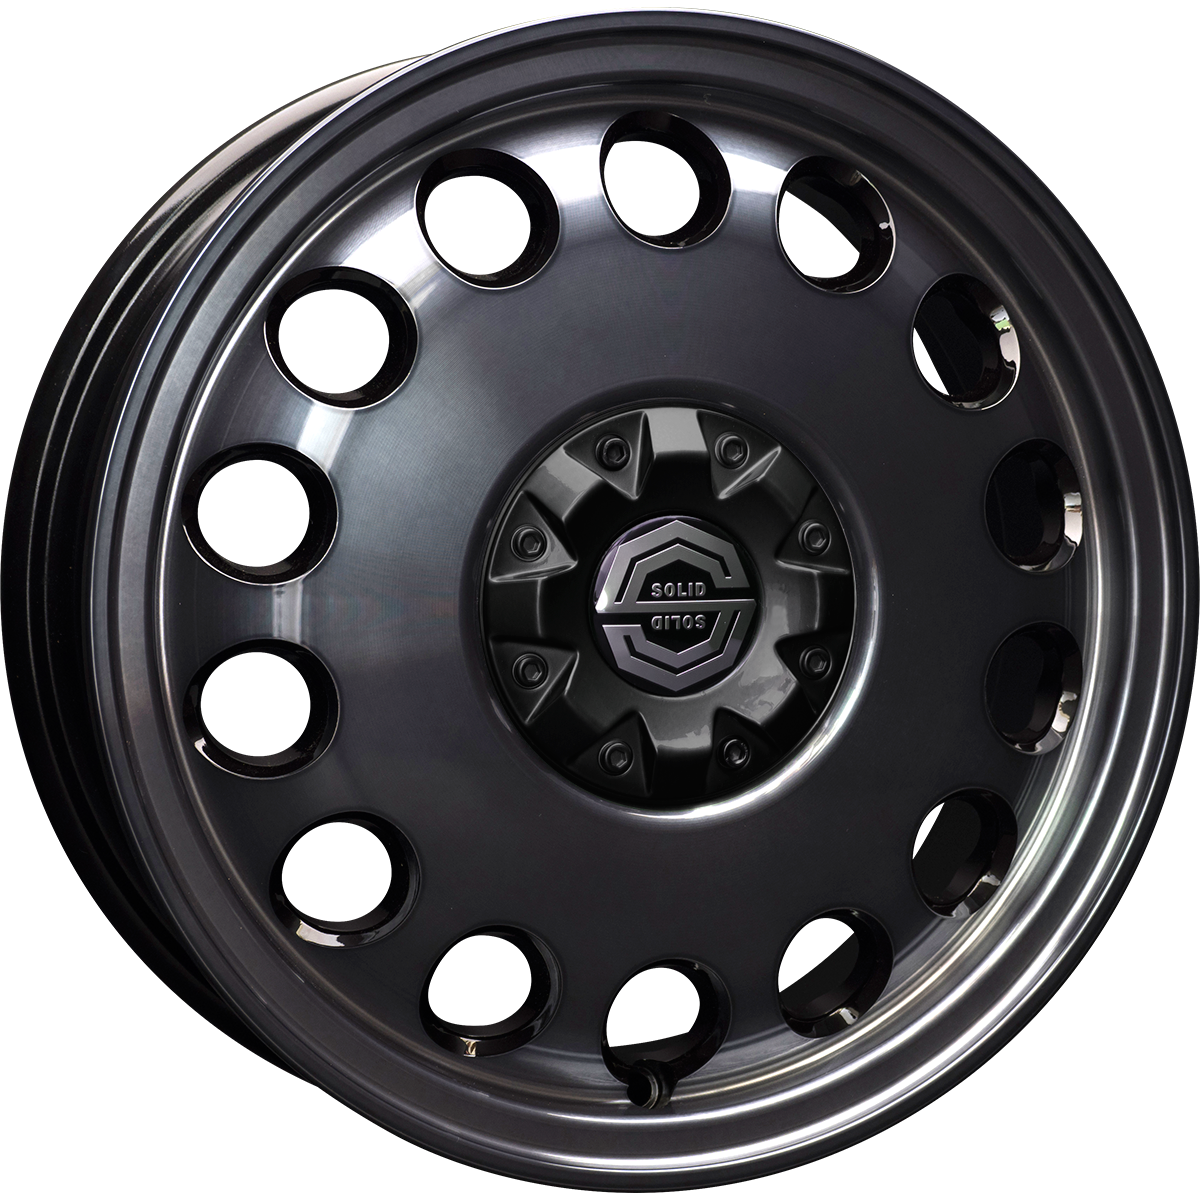 <br>size:14x4.5 100/4H +43<br>wheel color:MIST BLACK（艶ありスモーククリア）<br>